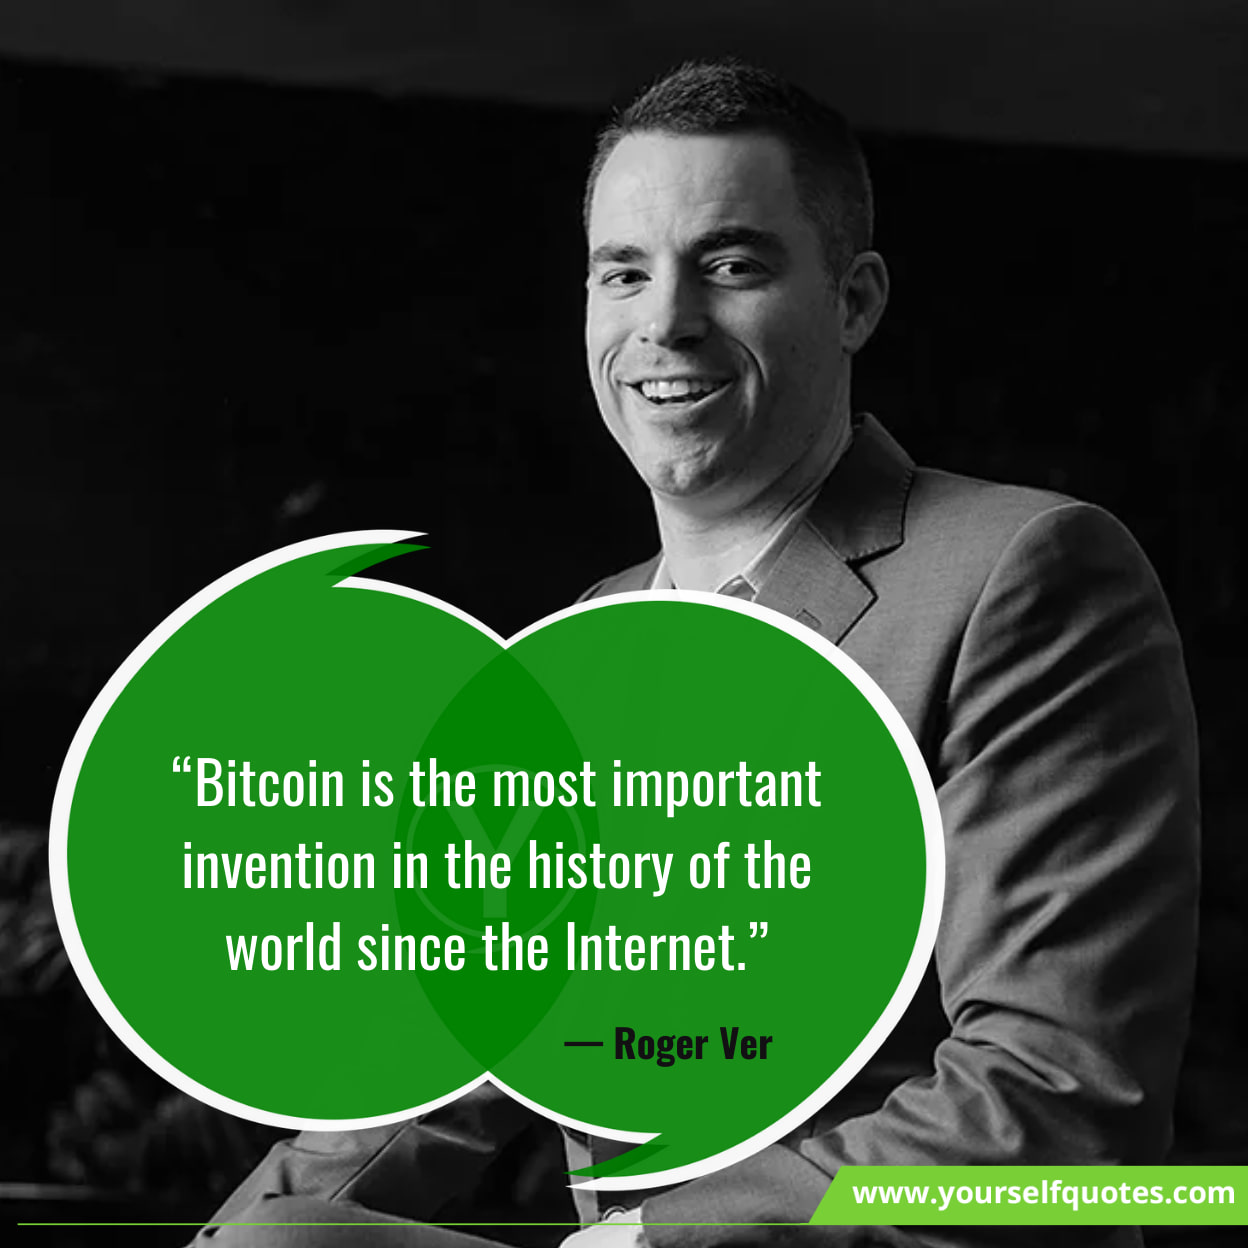 Best Quotes About Bitcoin